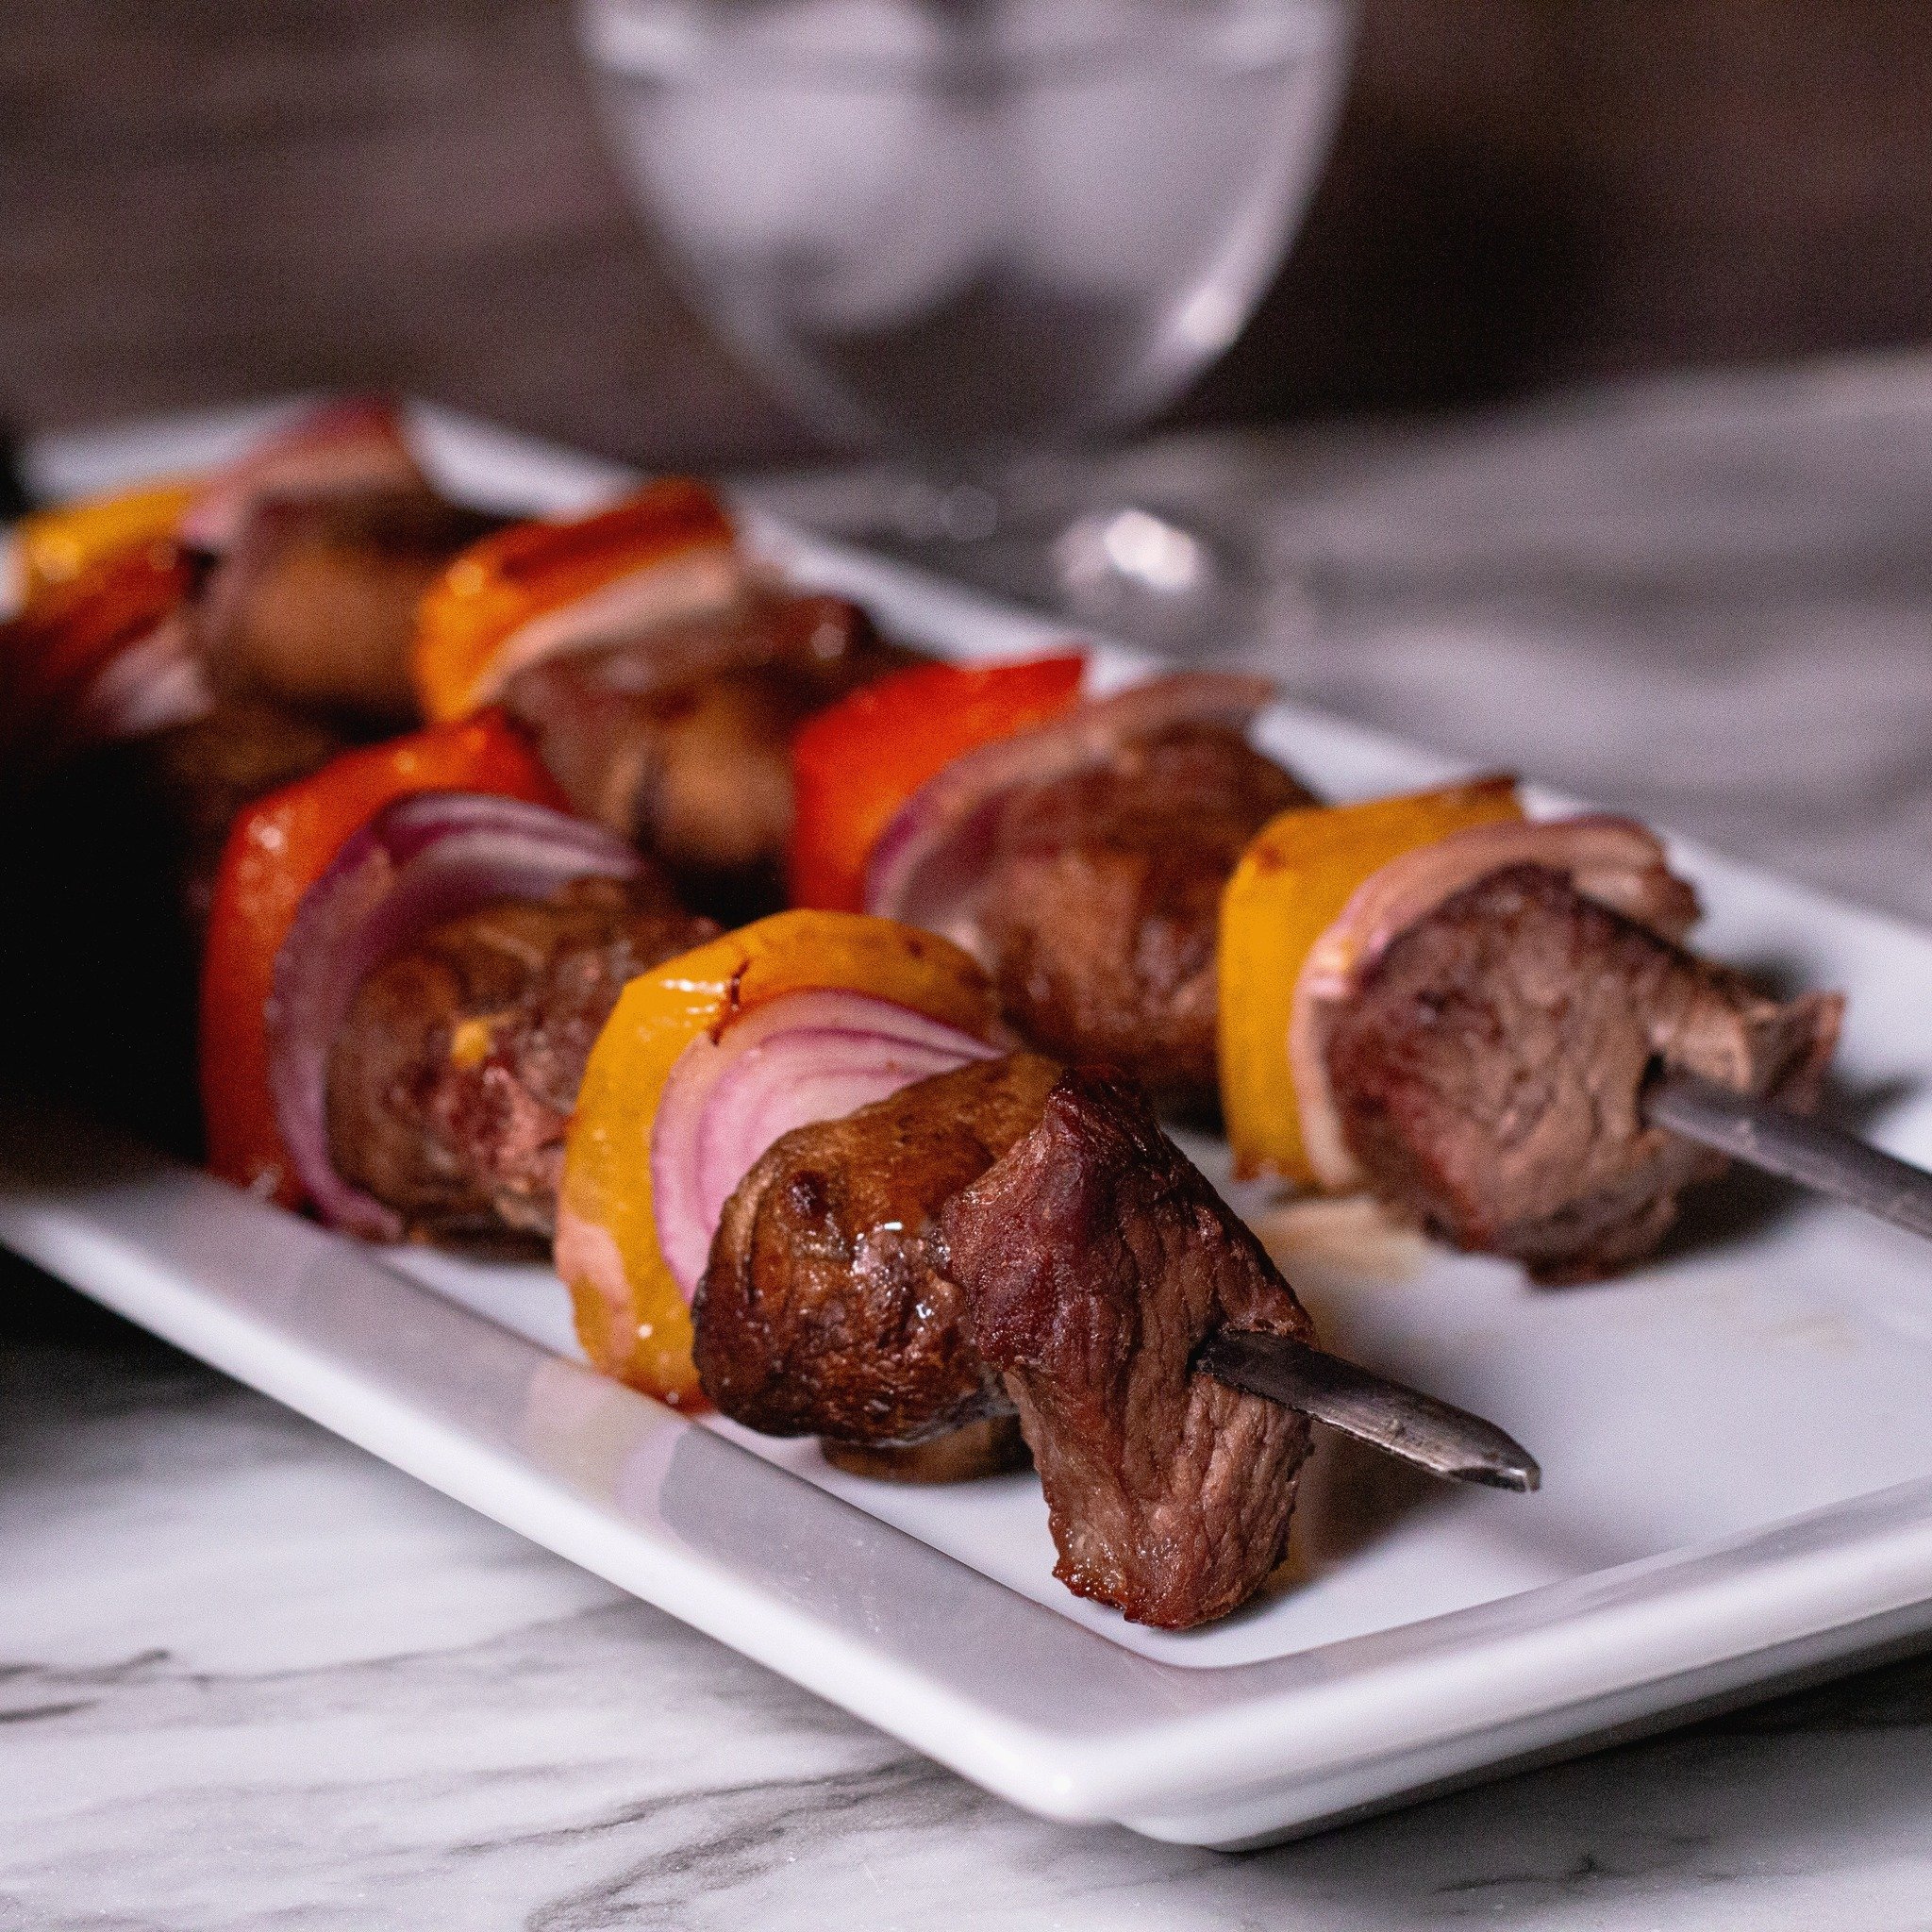 Fire up the grill and get ready for BBQ Steak Kebabs! Juicy steak, crisp veggies, and tangy marinade make these a hit at any backyard BBQ. Visit our blog for the recipe. 

#MidamarHalal #Halal #HalalRecipe #BBQKebabs #HalalKababs